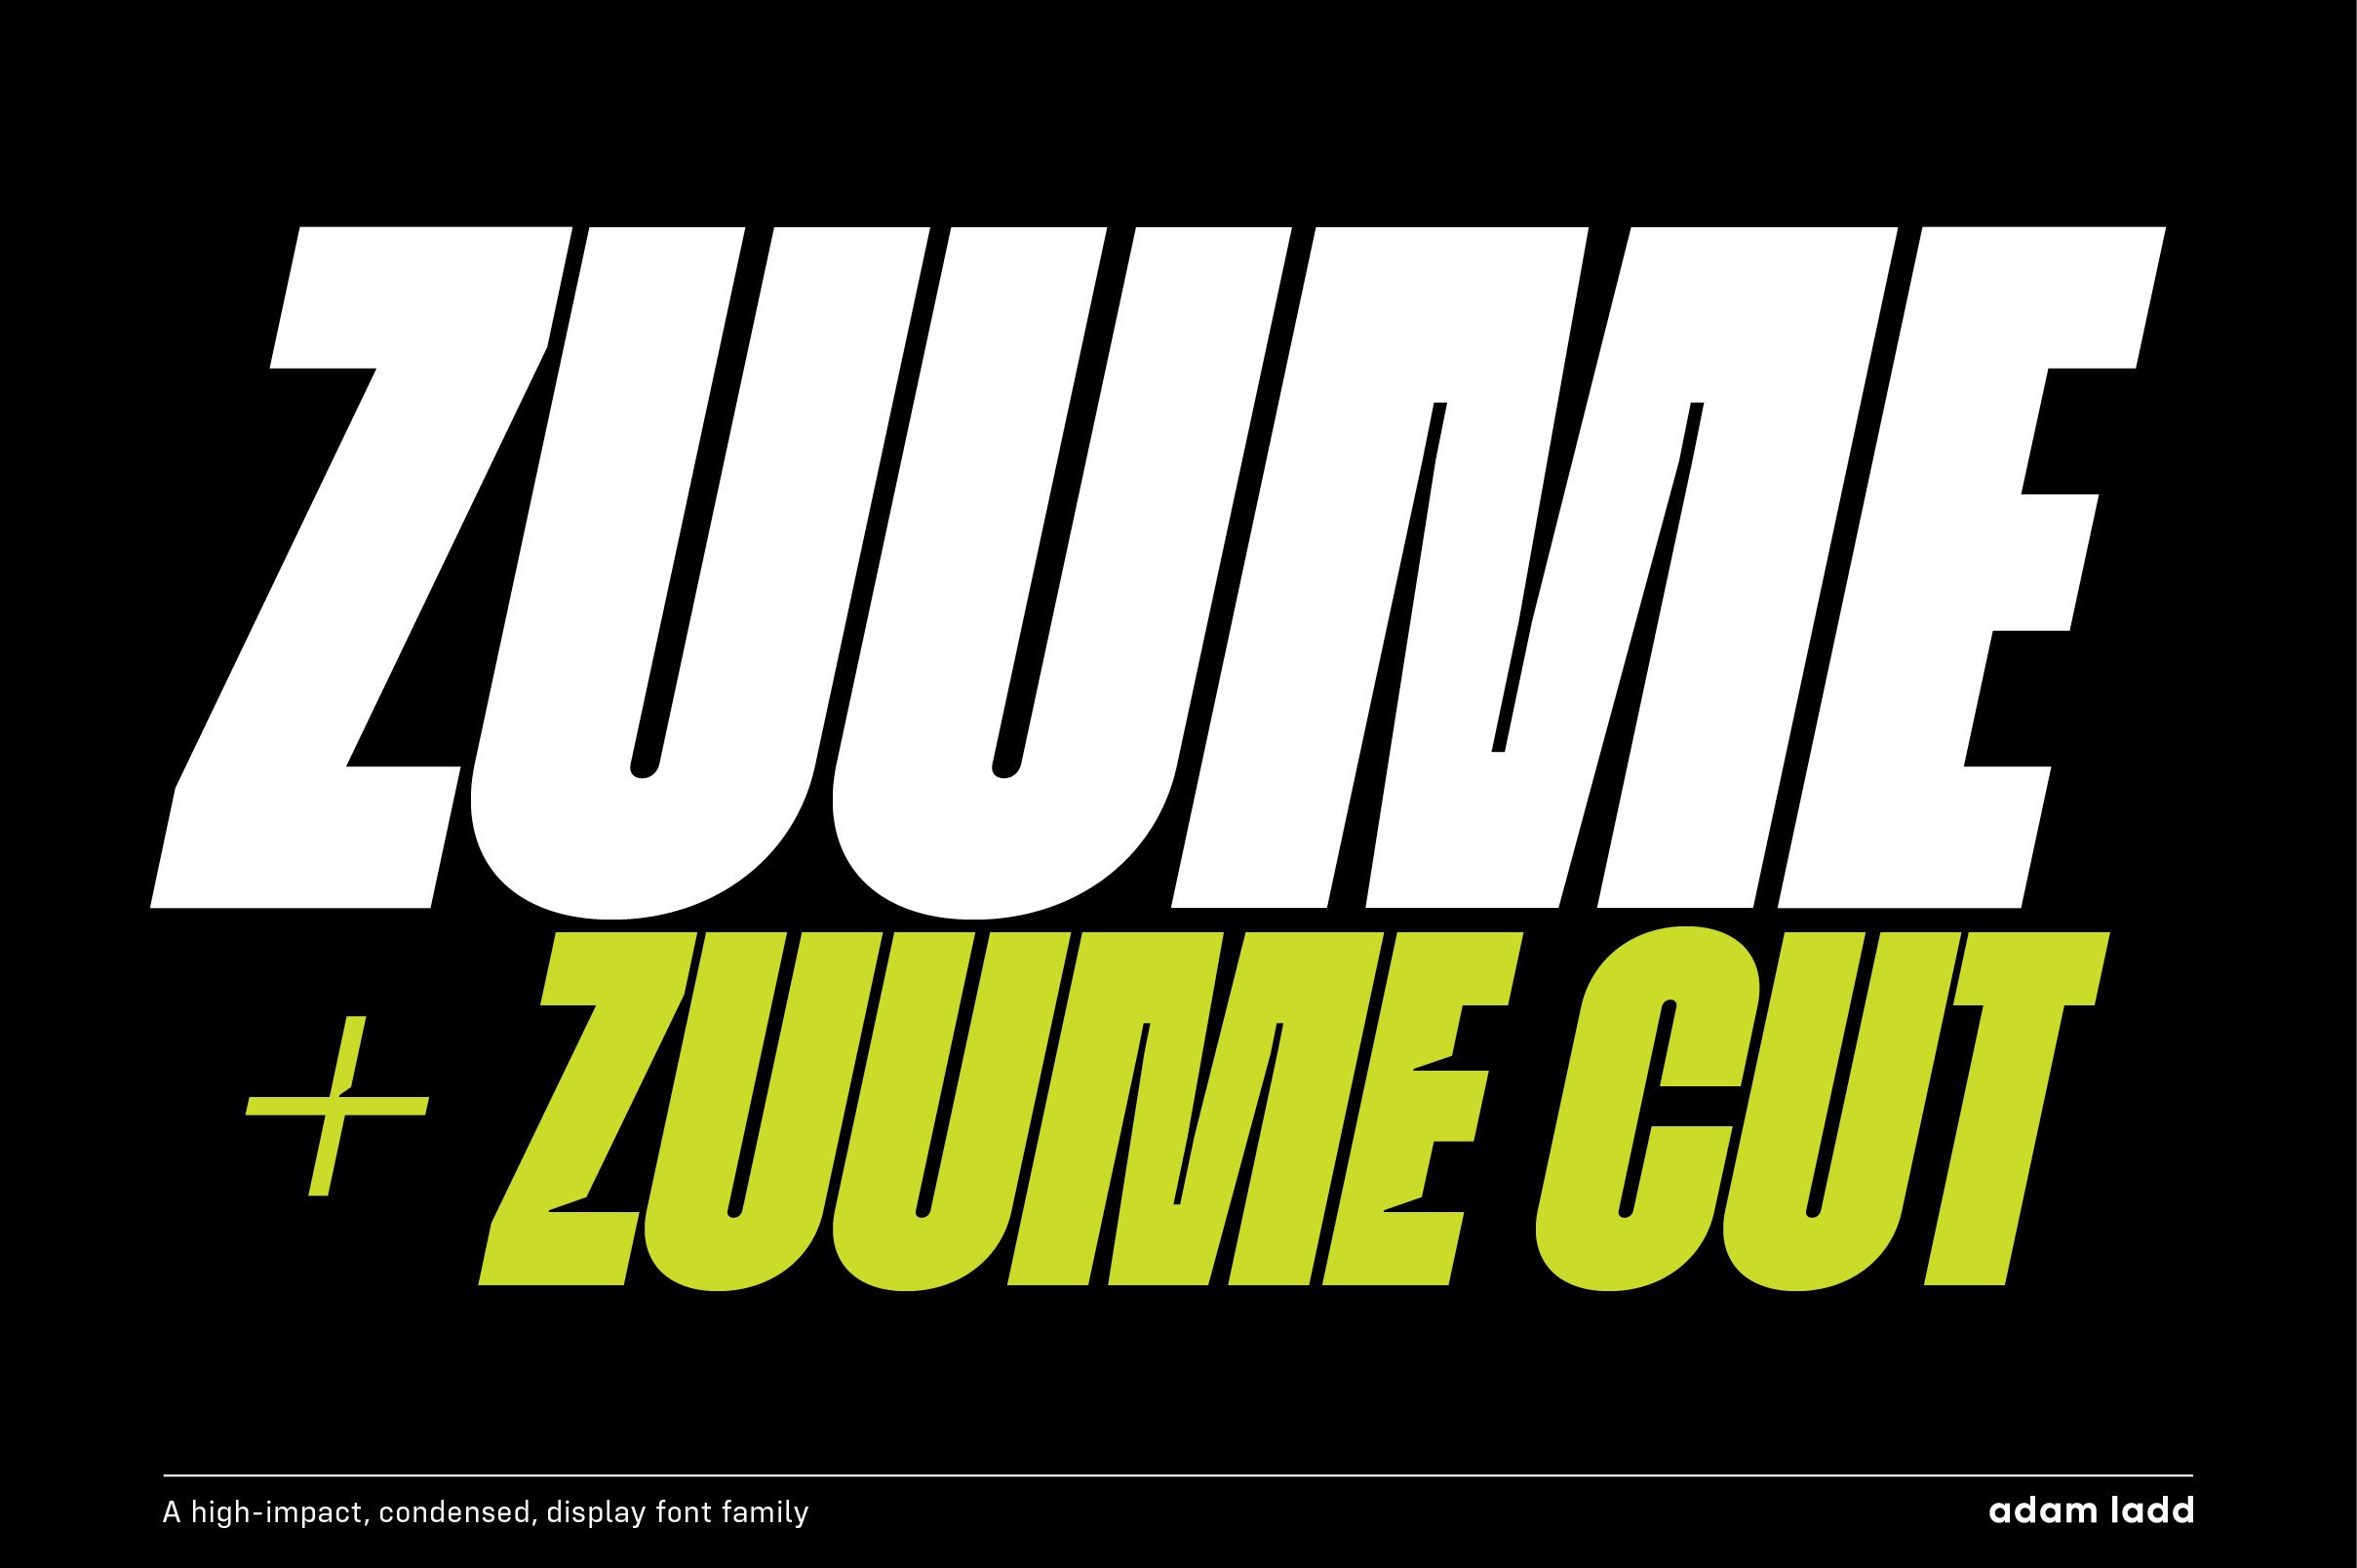 Zuume Font Family cover image.